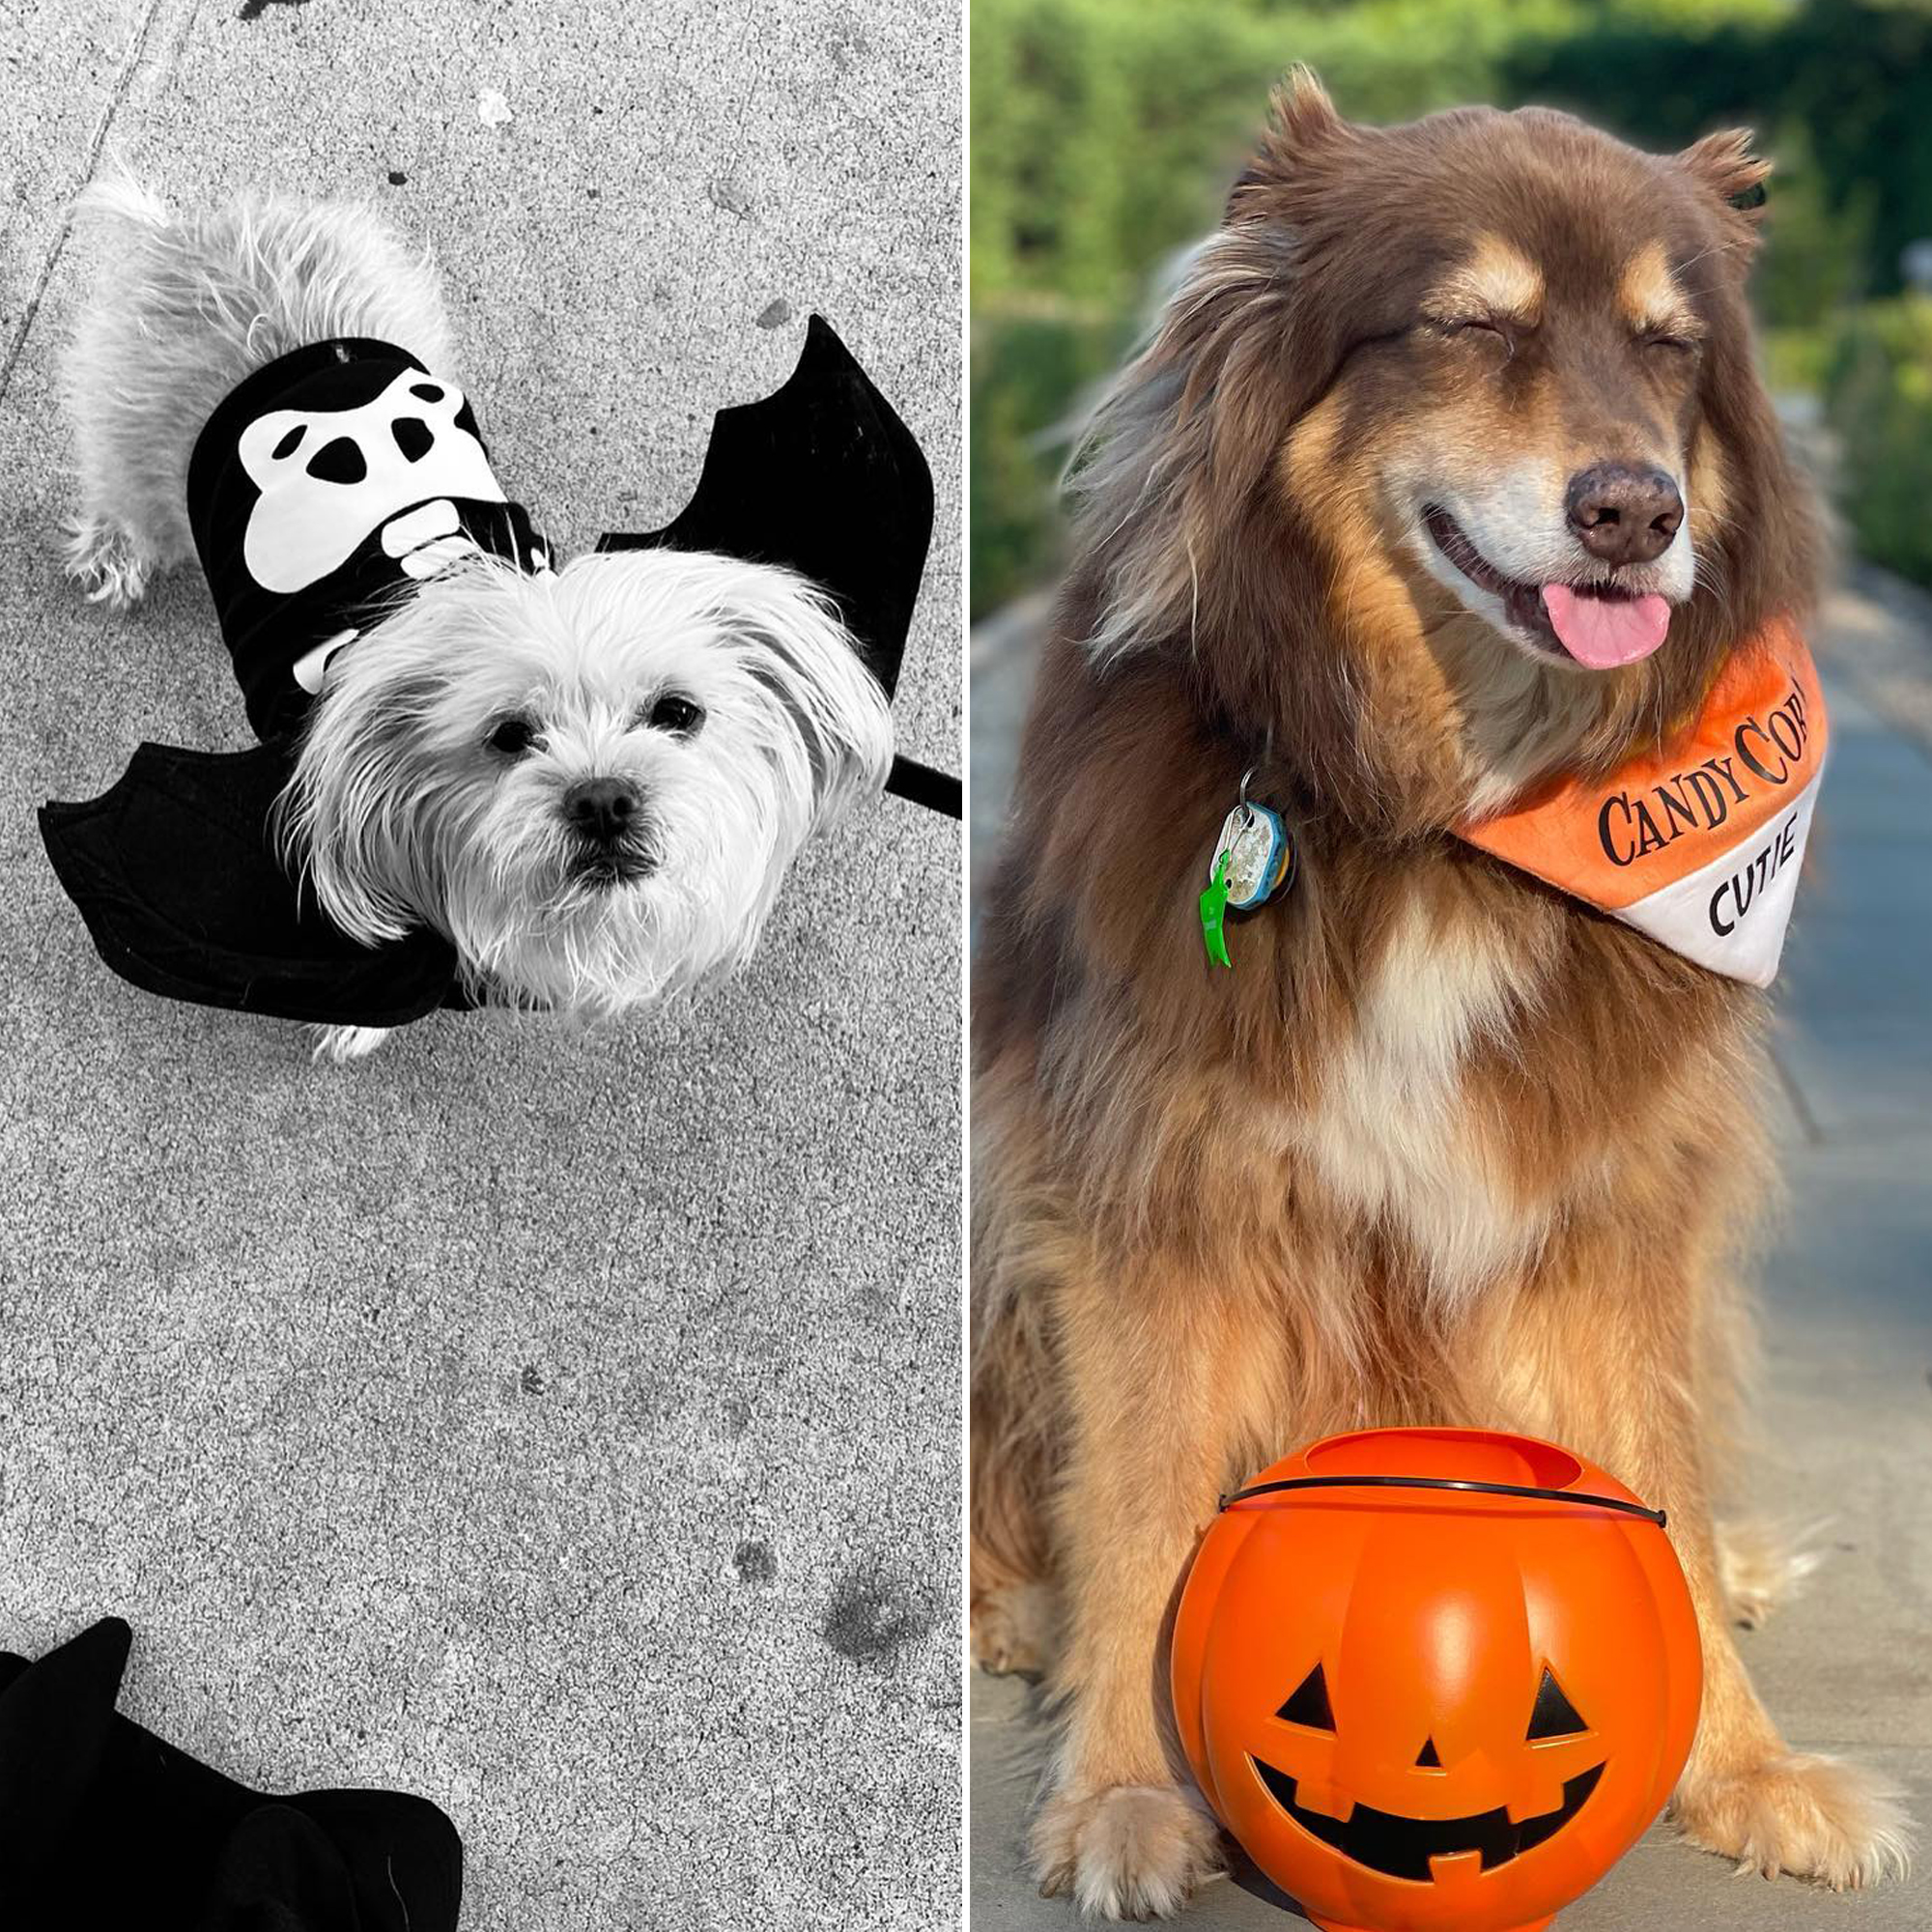 Top 10 Halloween Costume Ideas for Dogs